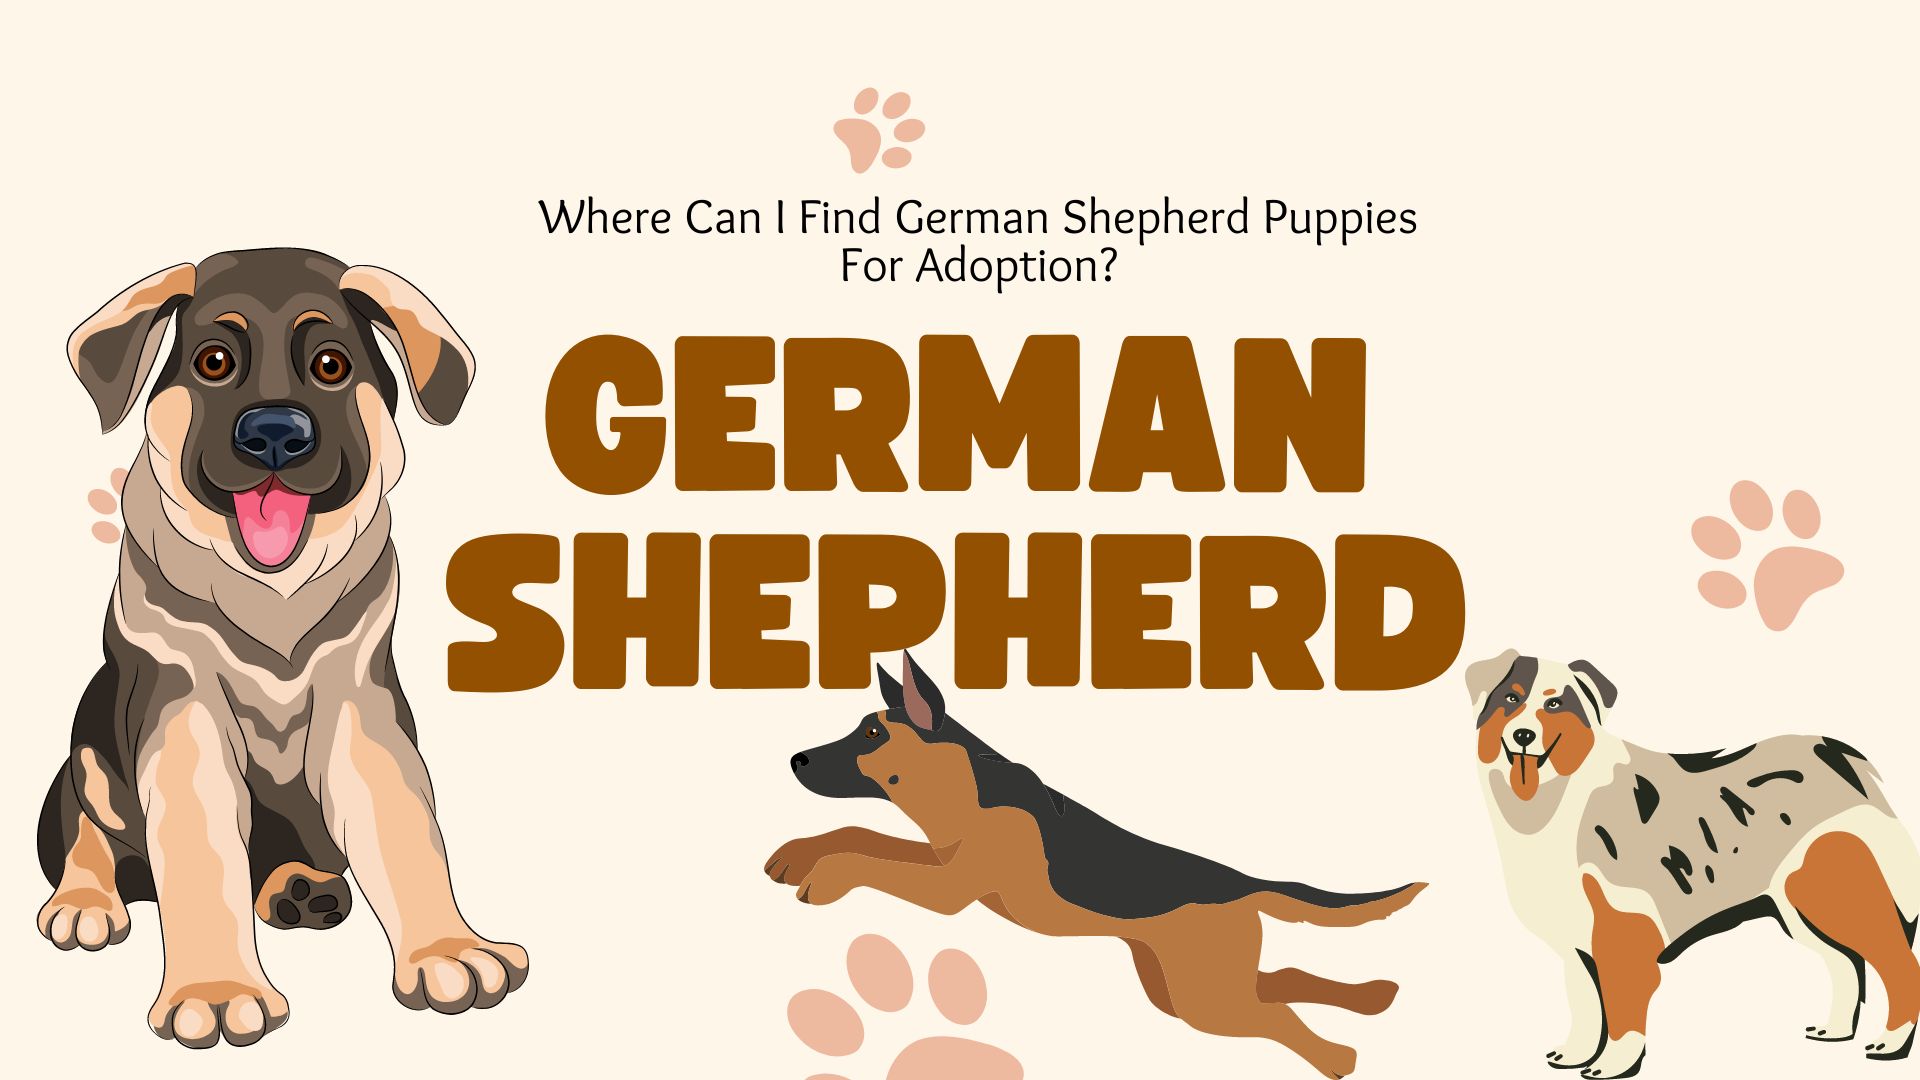 Where Can I Find German Shepherd Puppies For Adoption